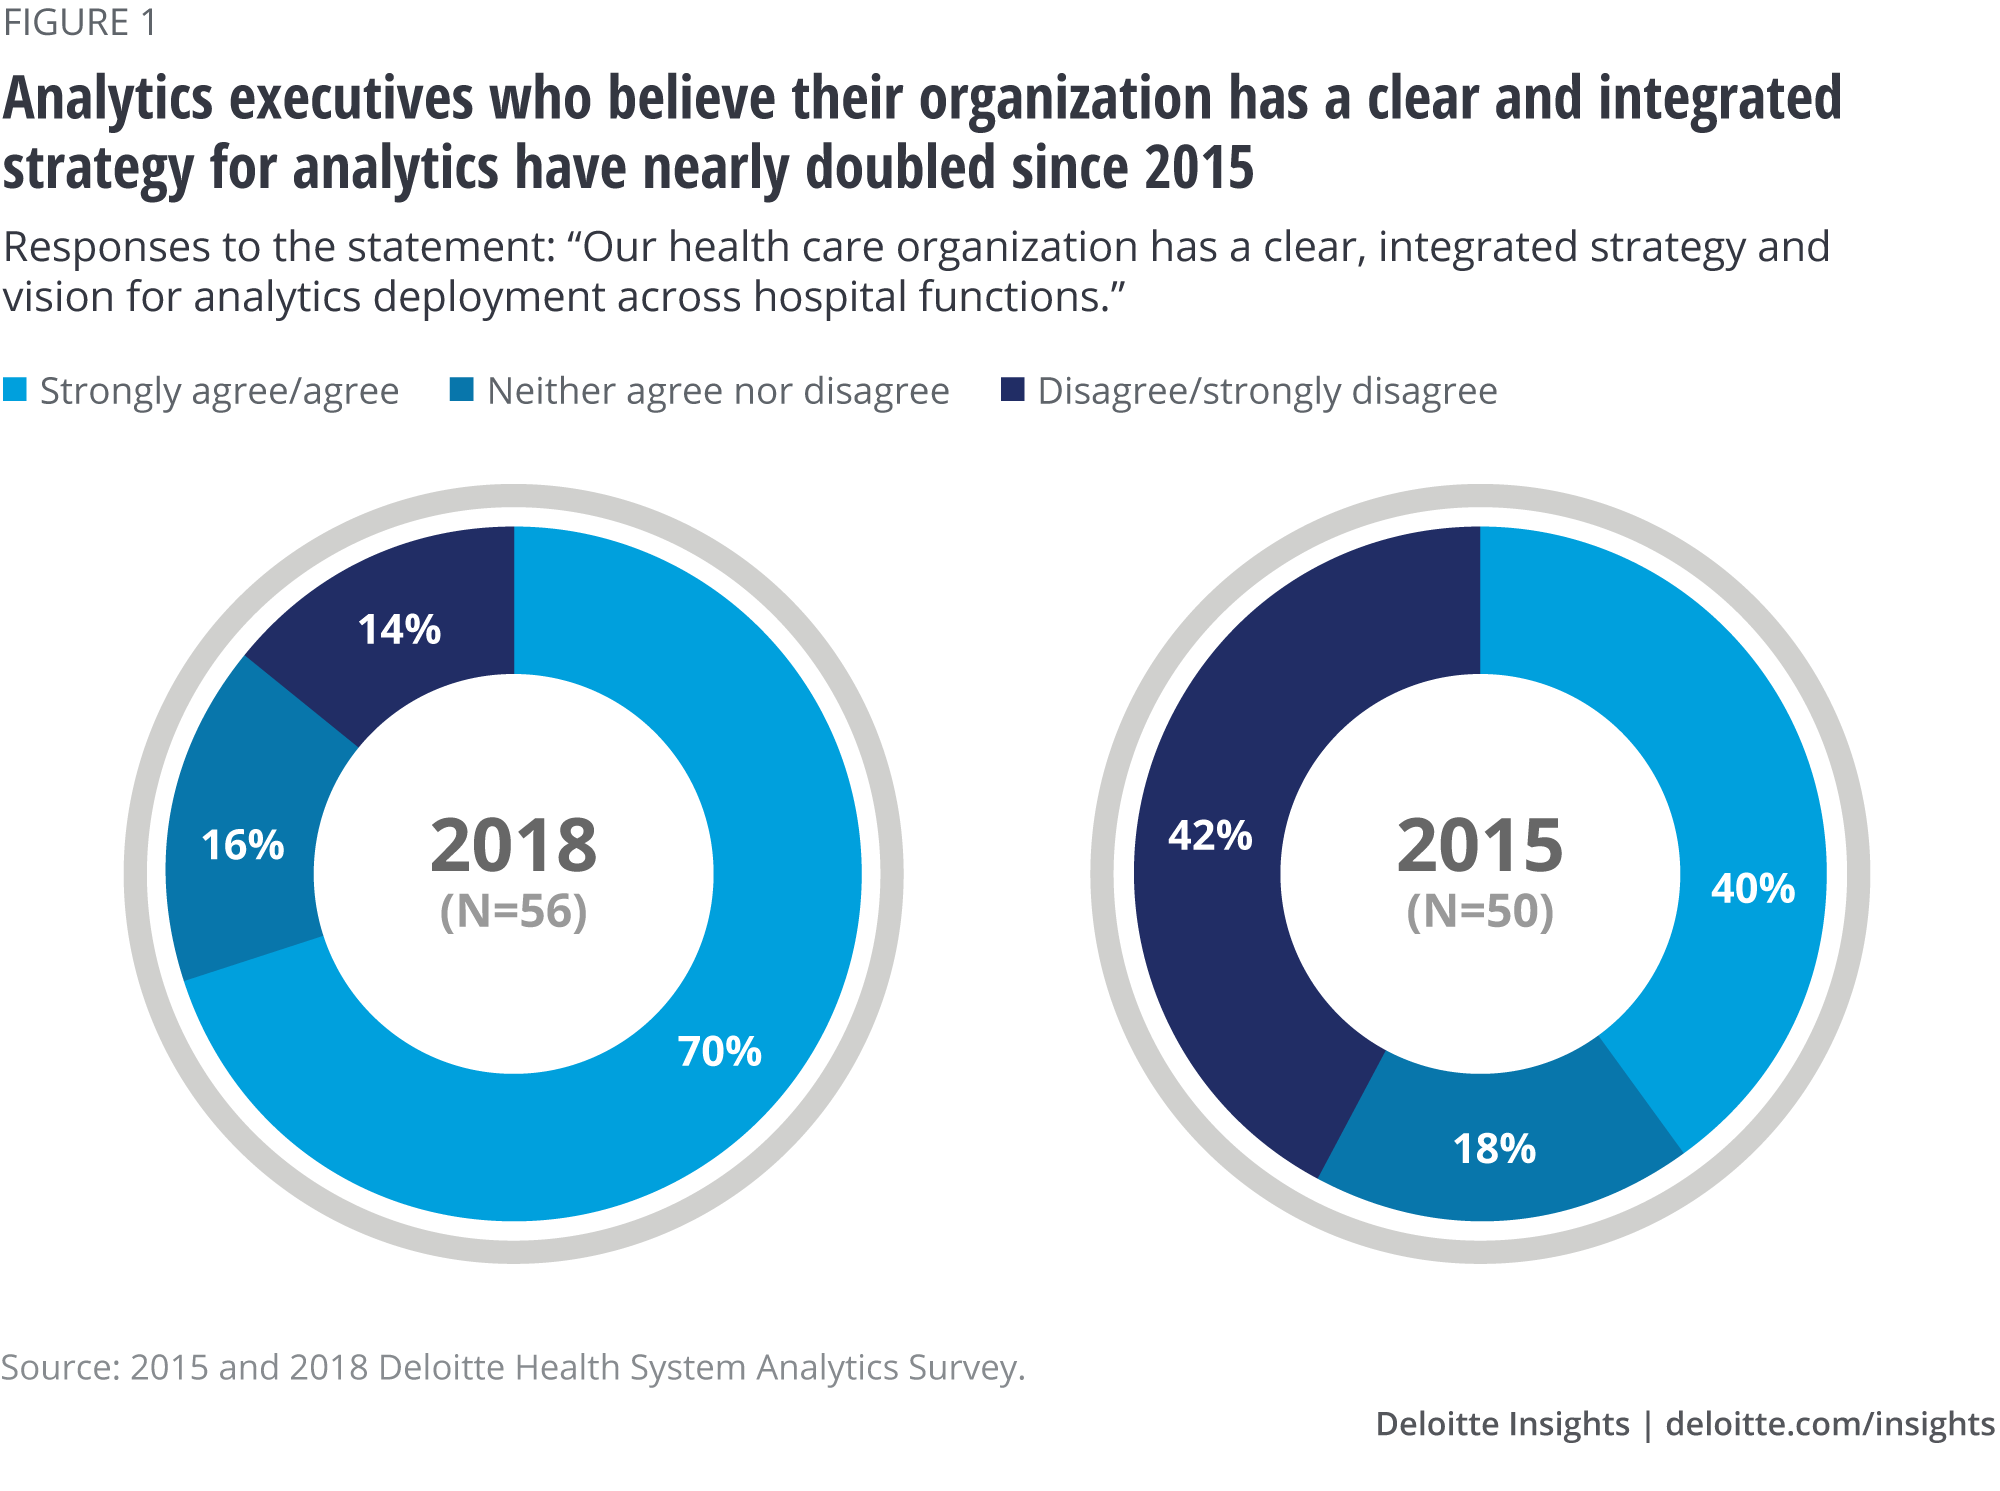 Analytics executives who believe their organization has a clear and integrated strategy for analytics have nearly doubled since 2015